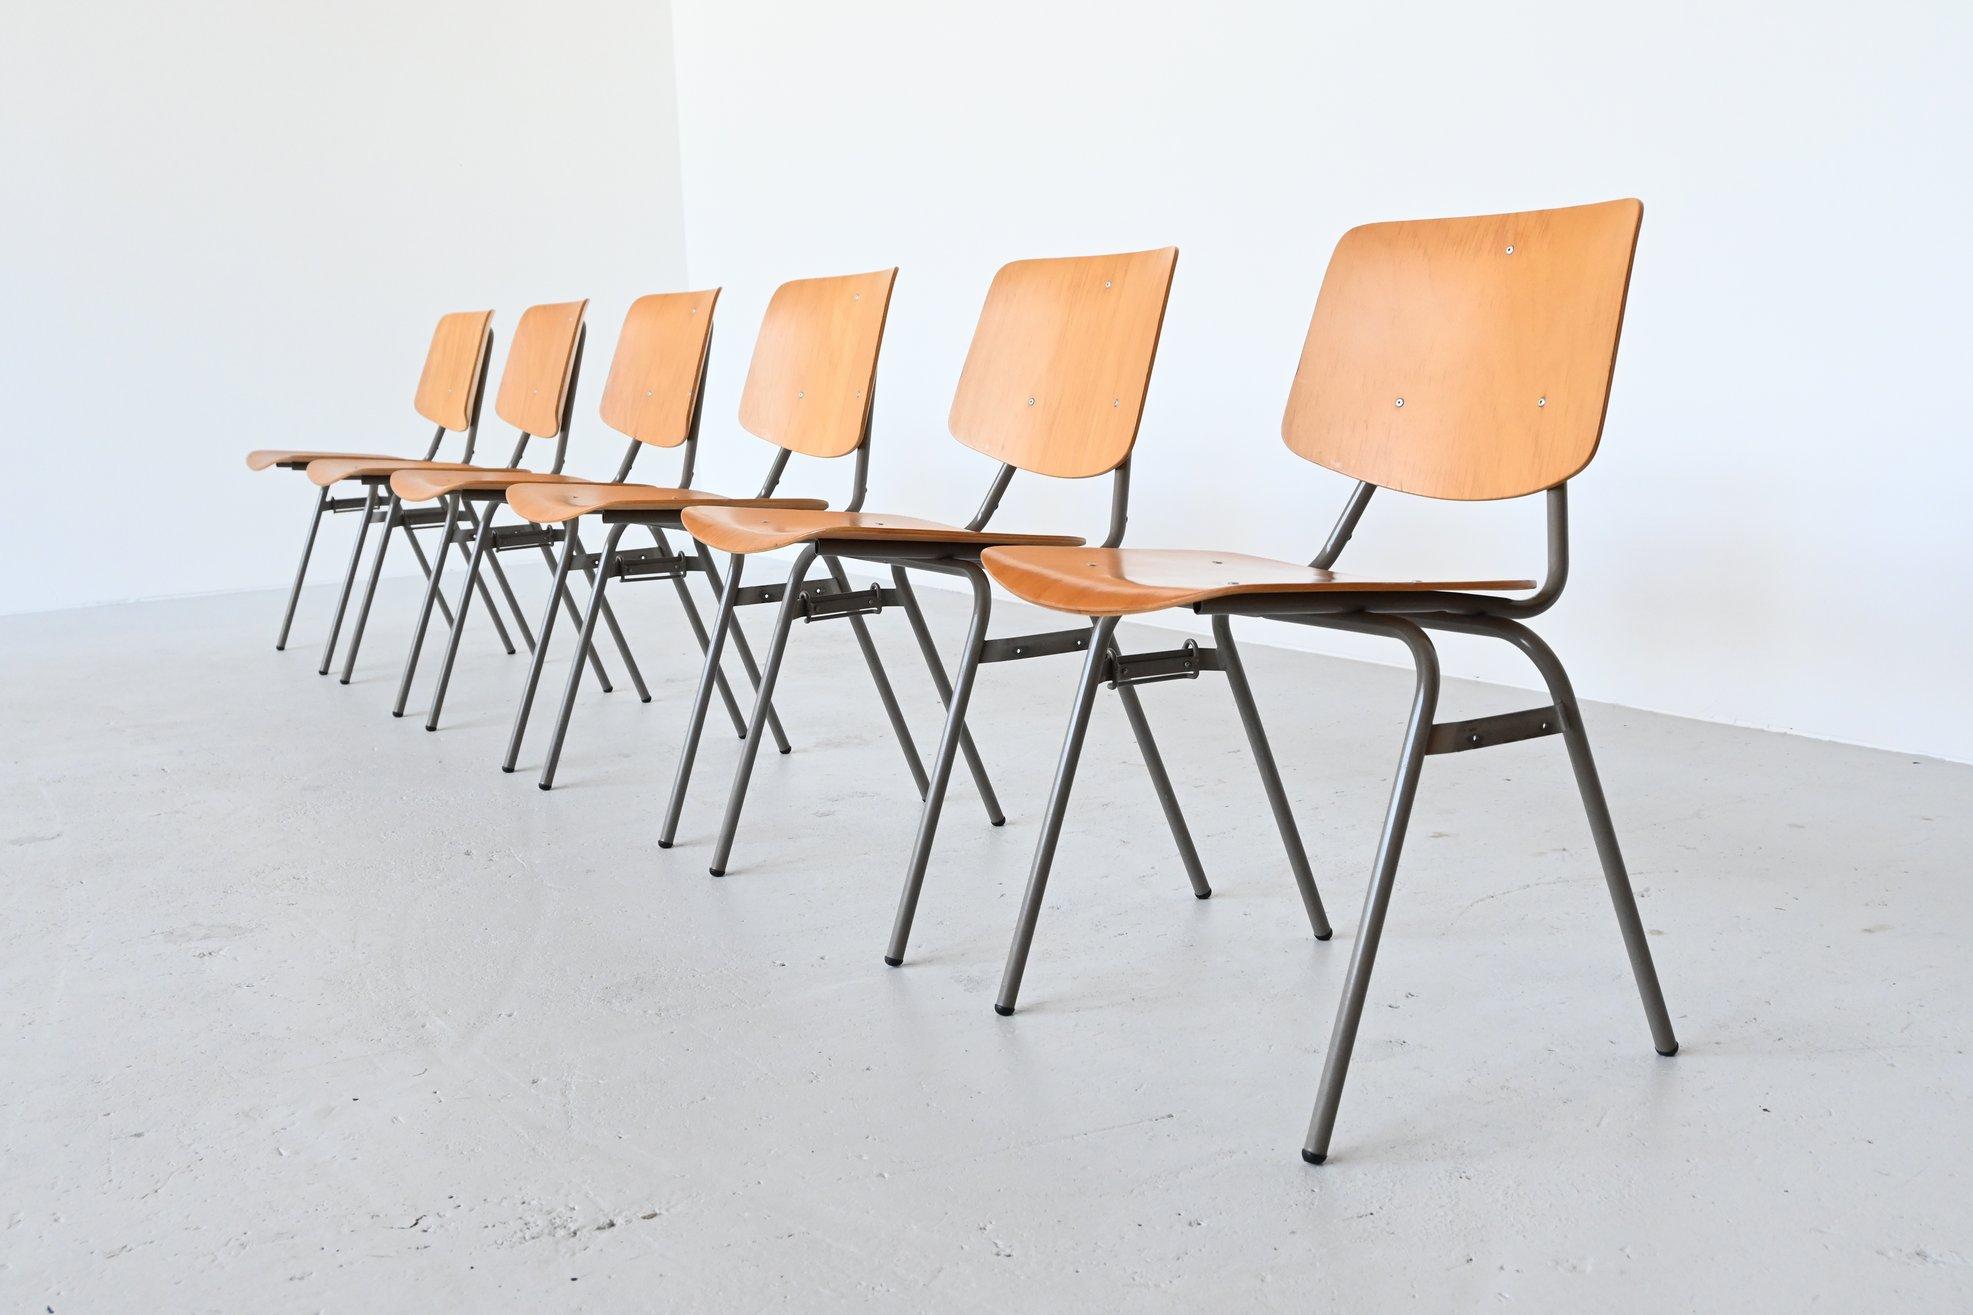 Very nice stacking chairs model 305 designed by Kho Liang Ie and manufactured by CAR Katwijk, The Netherlands, 1957. This Industrial chair was designed by Kho Liang Ie to compete with other chairs from the same period. They were cheap to produce and